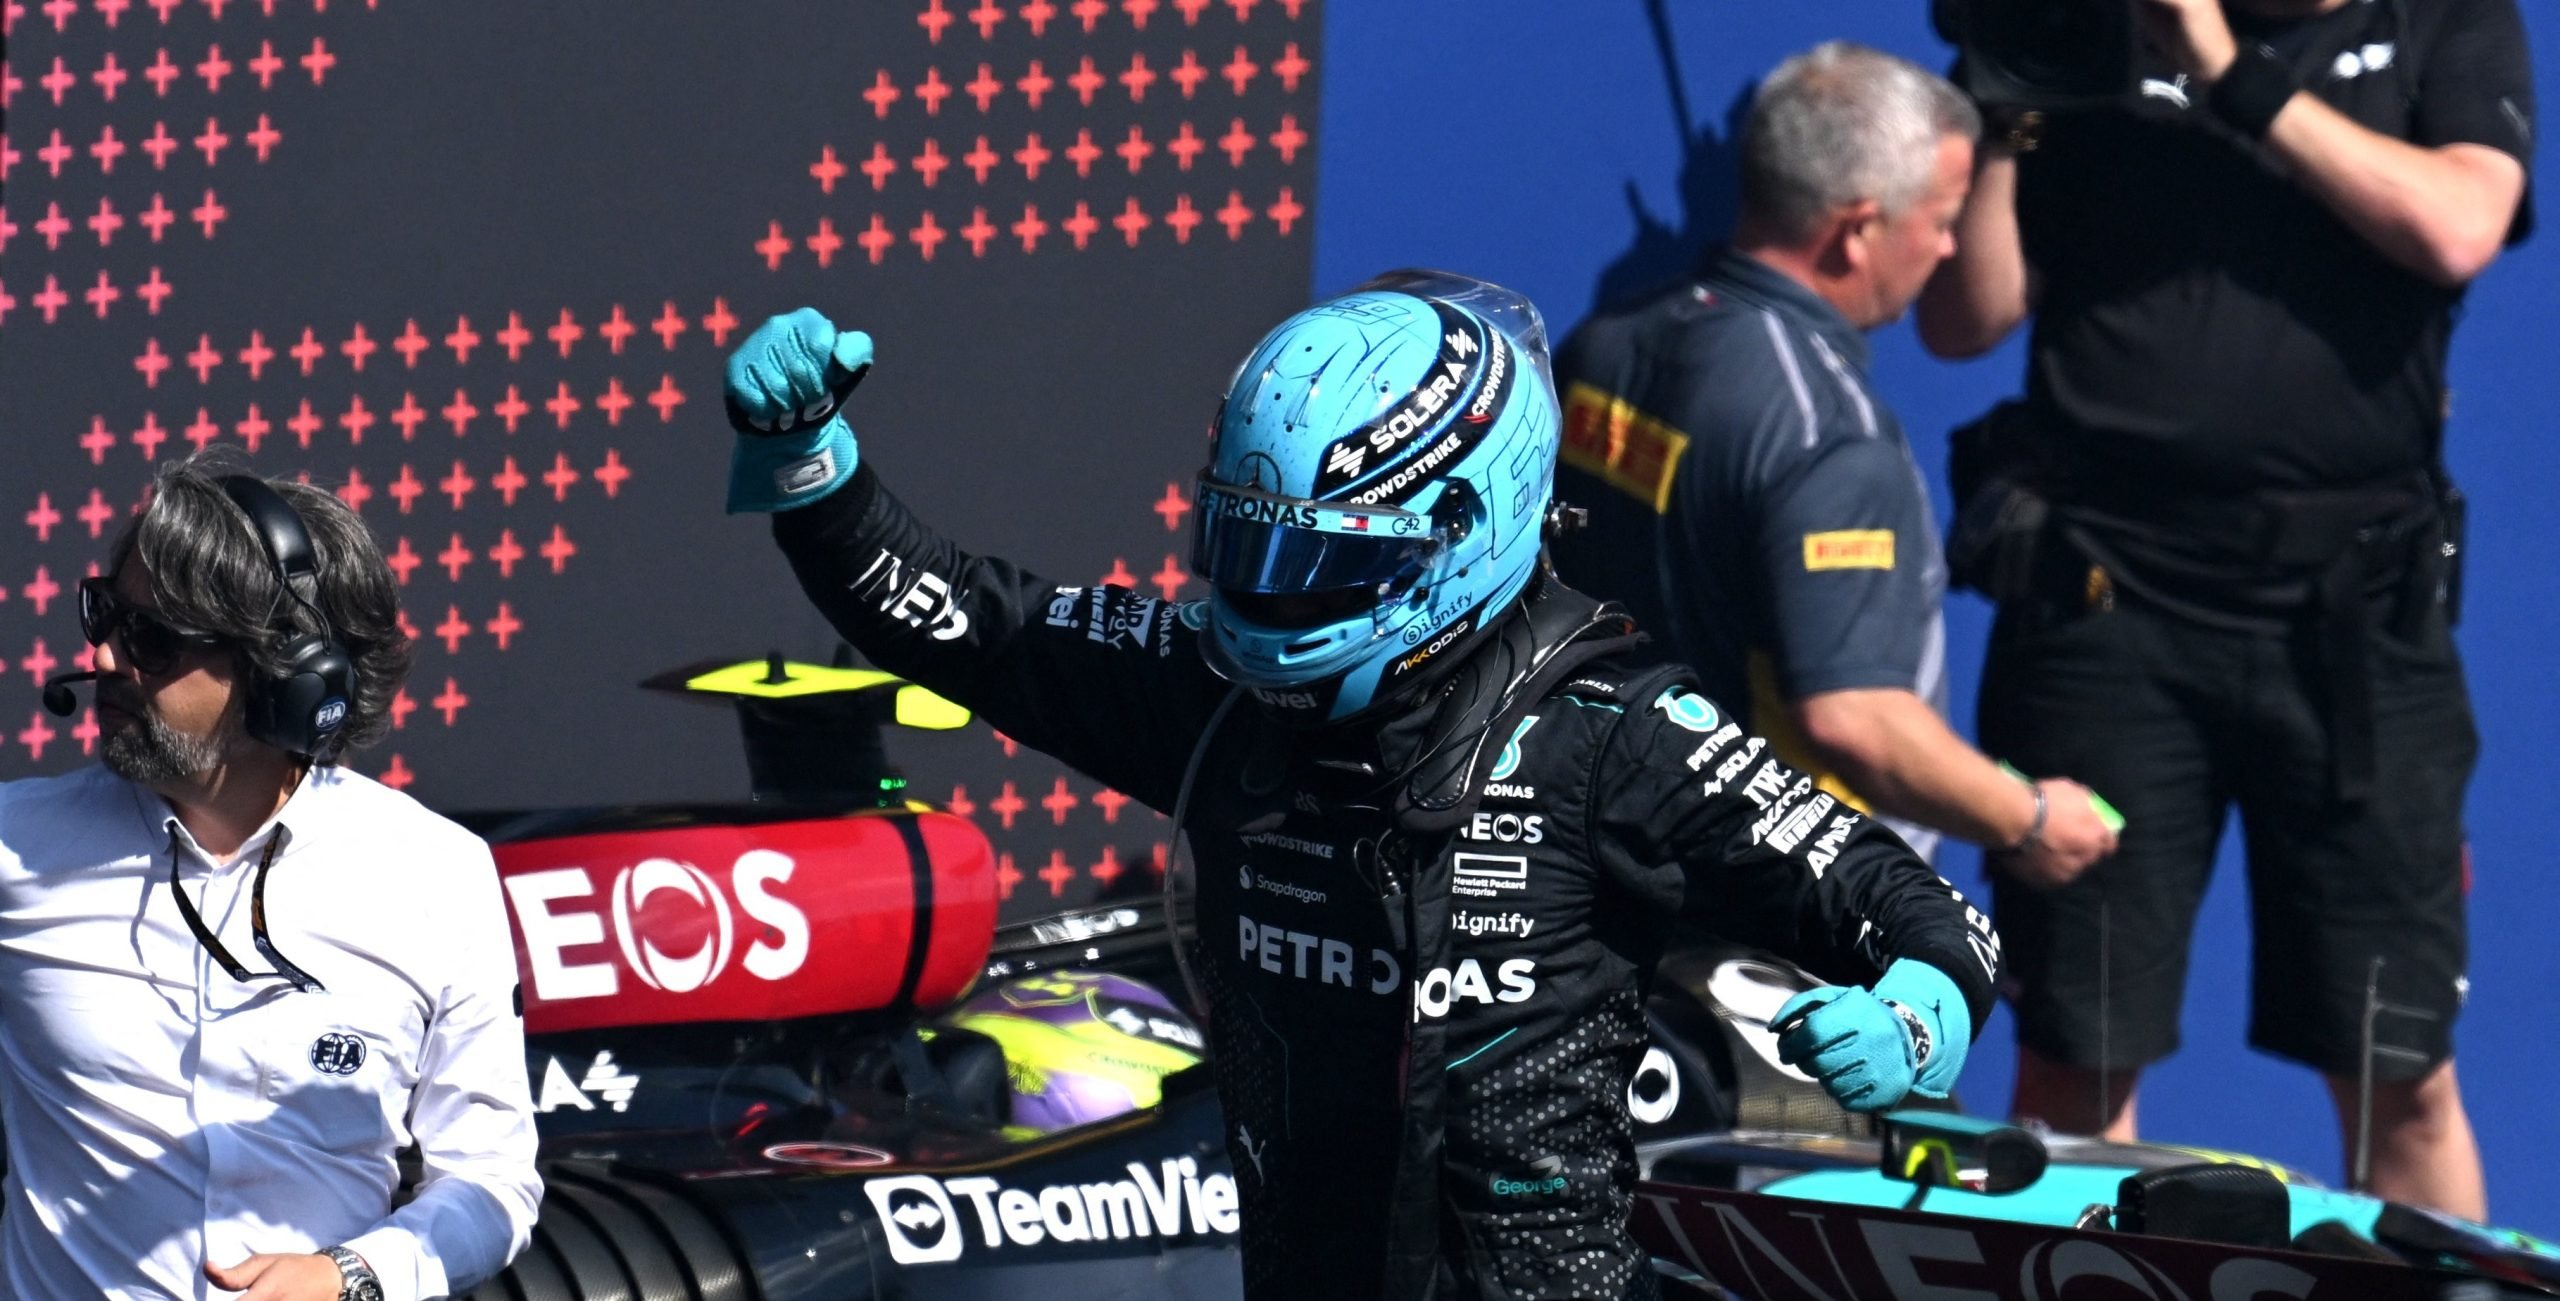 Russell triumphs at the Belgium GP, Mercedes with 1-2 at Spa 6